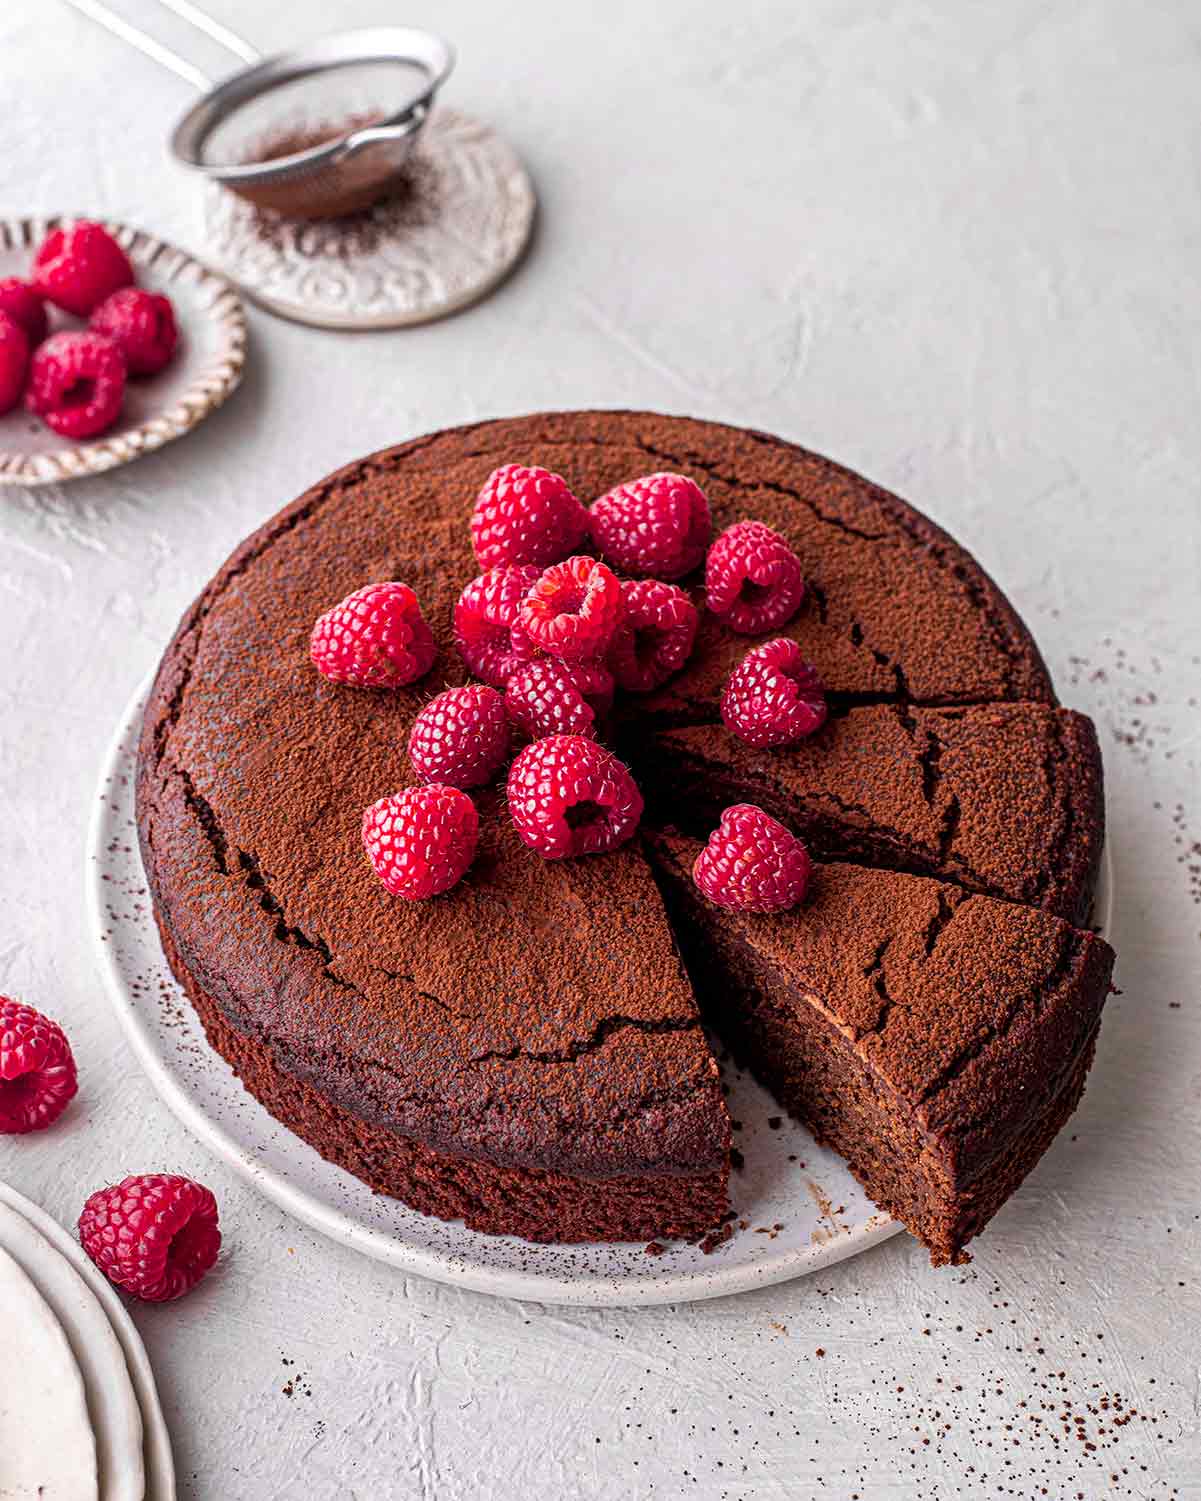 Flourless vegan gluten free chocolate cake on plate with a dusting of cocoa and fresh raspberries on top.